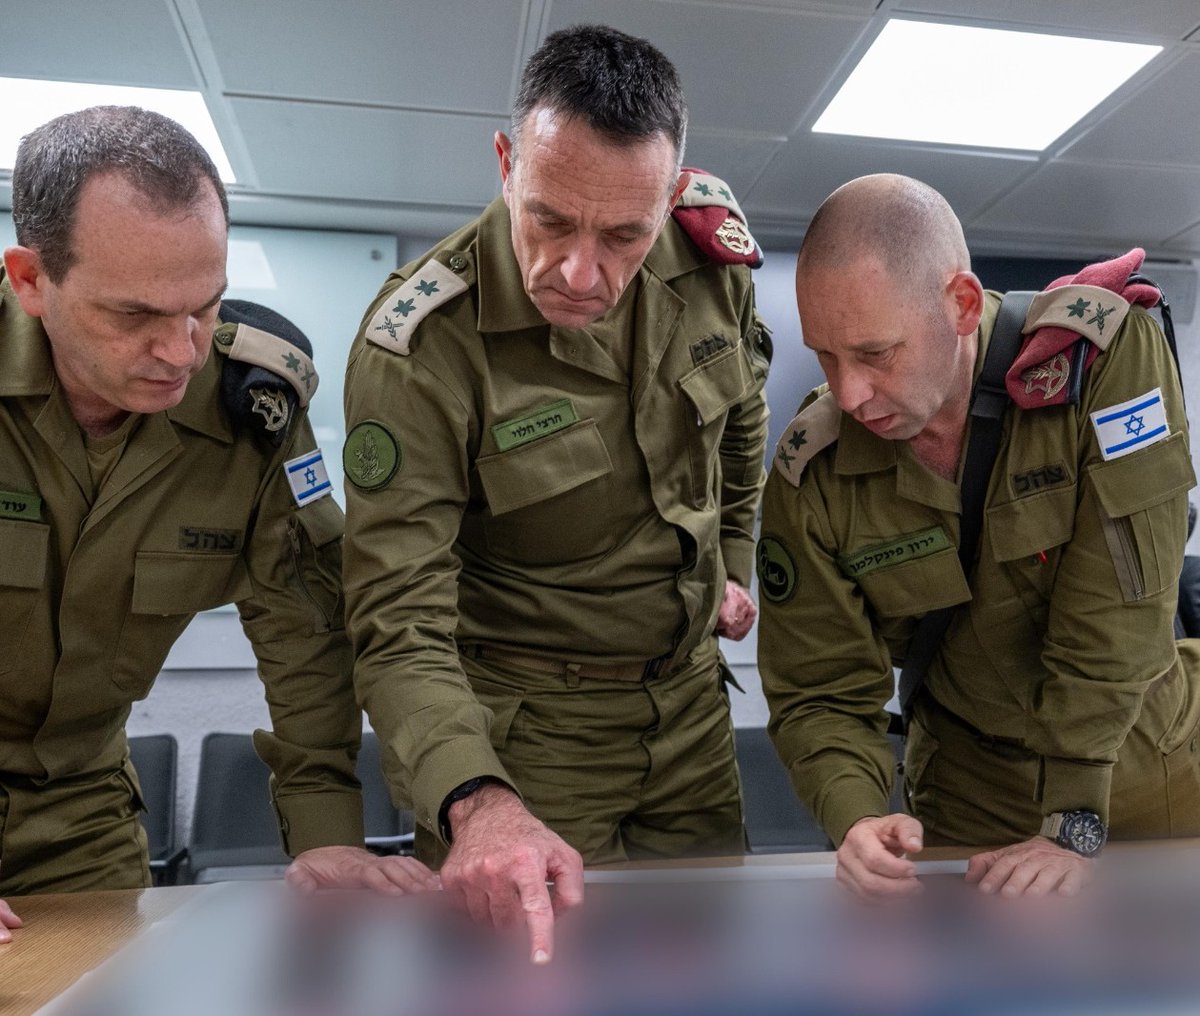 Israeli army Chief of Staff Lt. Gen. Herzi Halevi approves battle plans for after the ceasefire during a meeting at the Southern Command HQ in Beersheba today. We know what needs to be done, and are ready for the next stage, Halevi says in remarks provided by the Israeli army